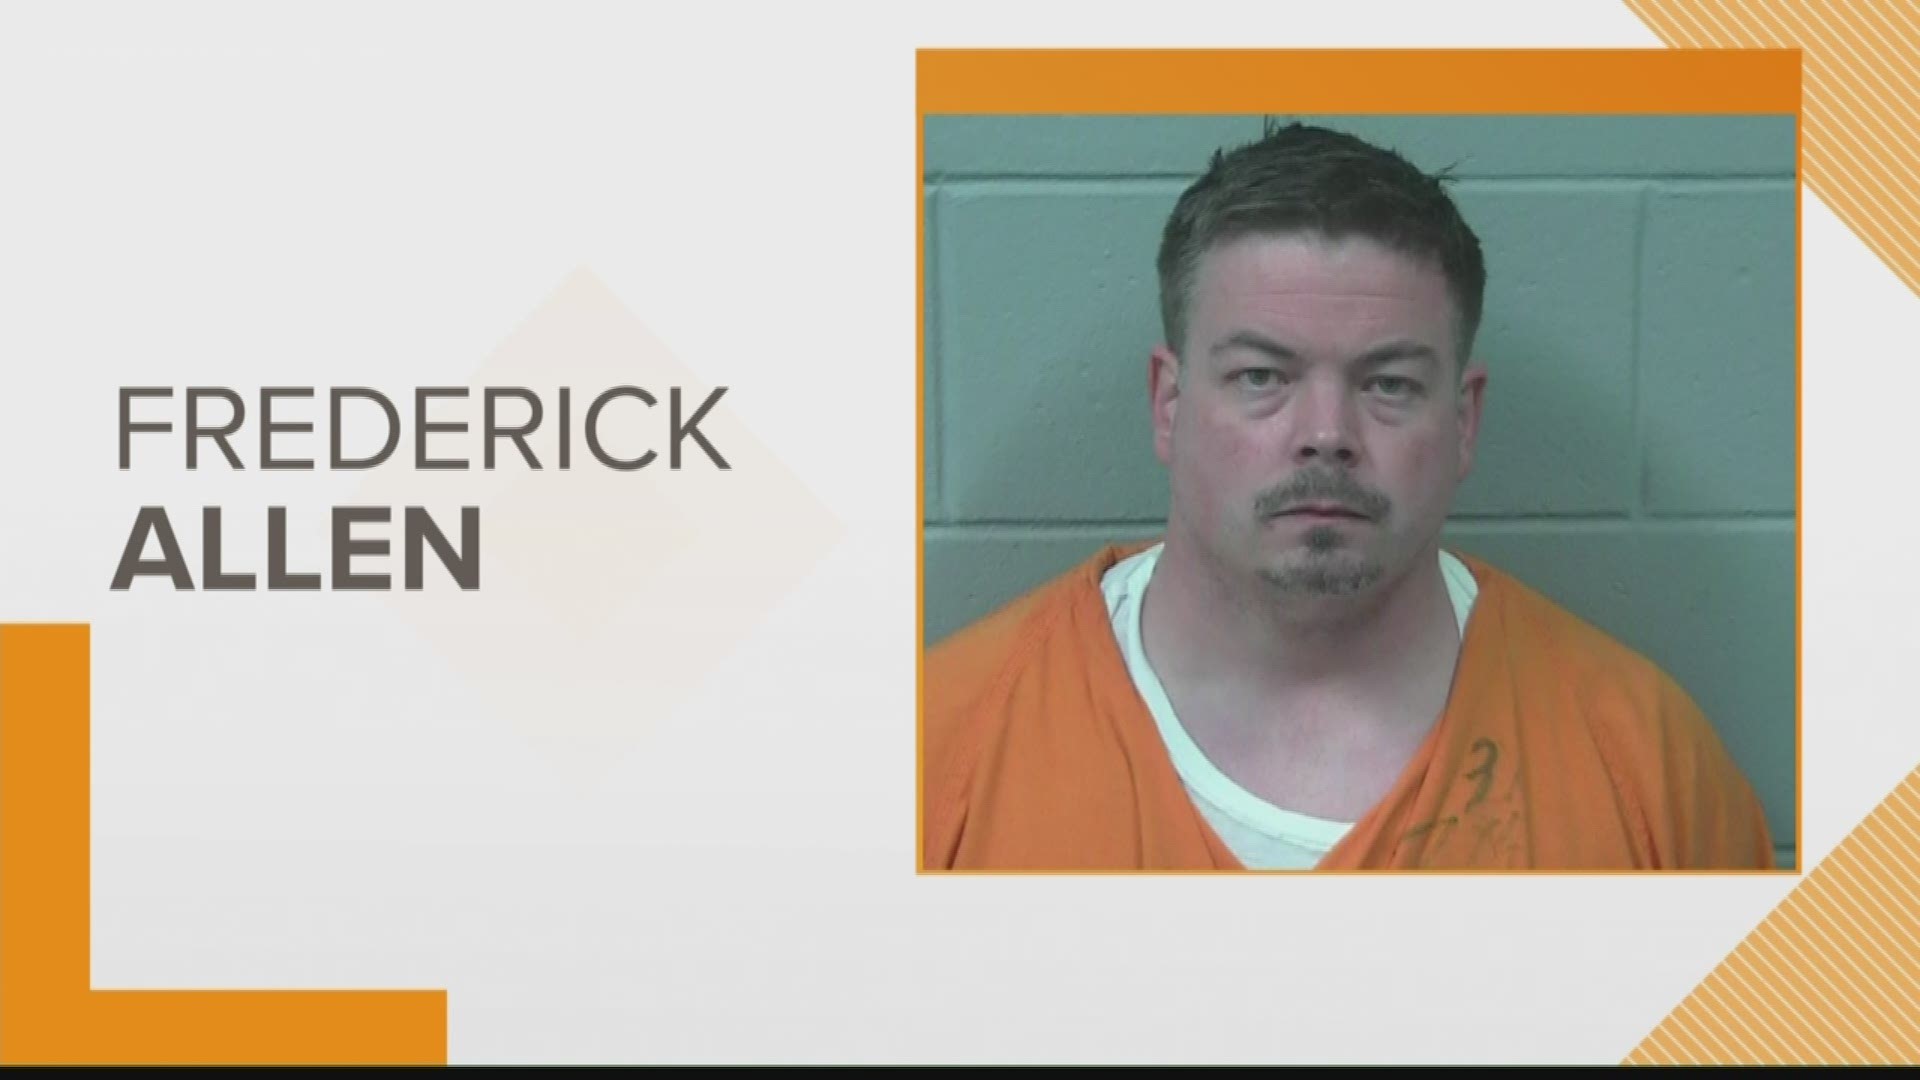 Frederick Allen is being held at the Penobscot County jail and will face a murder charge in the death of his wife Anielka Allen.